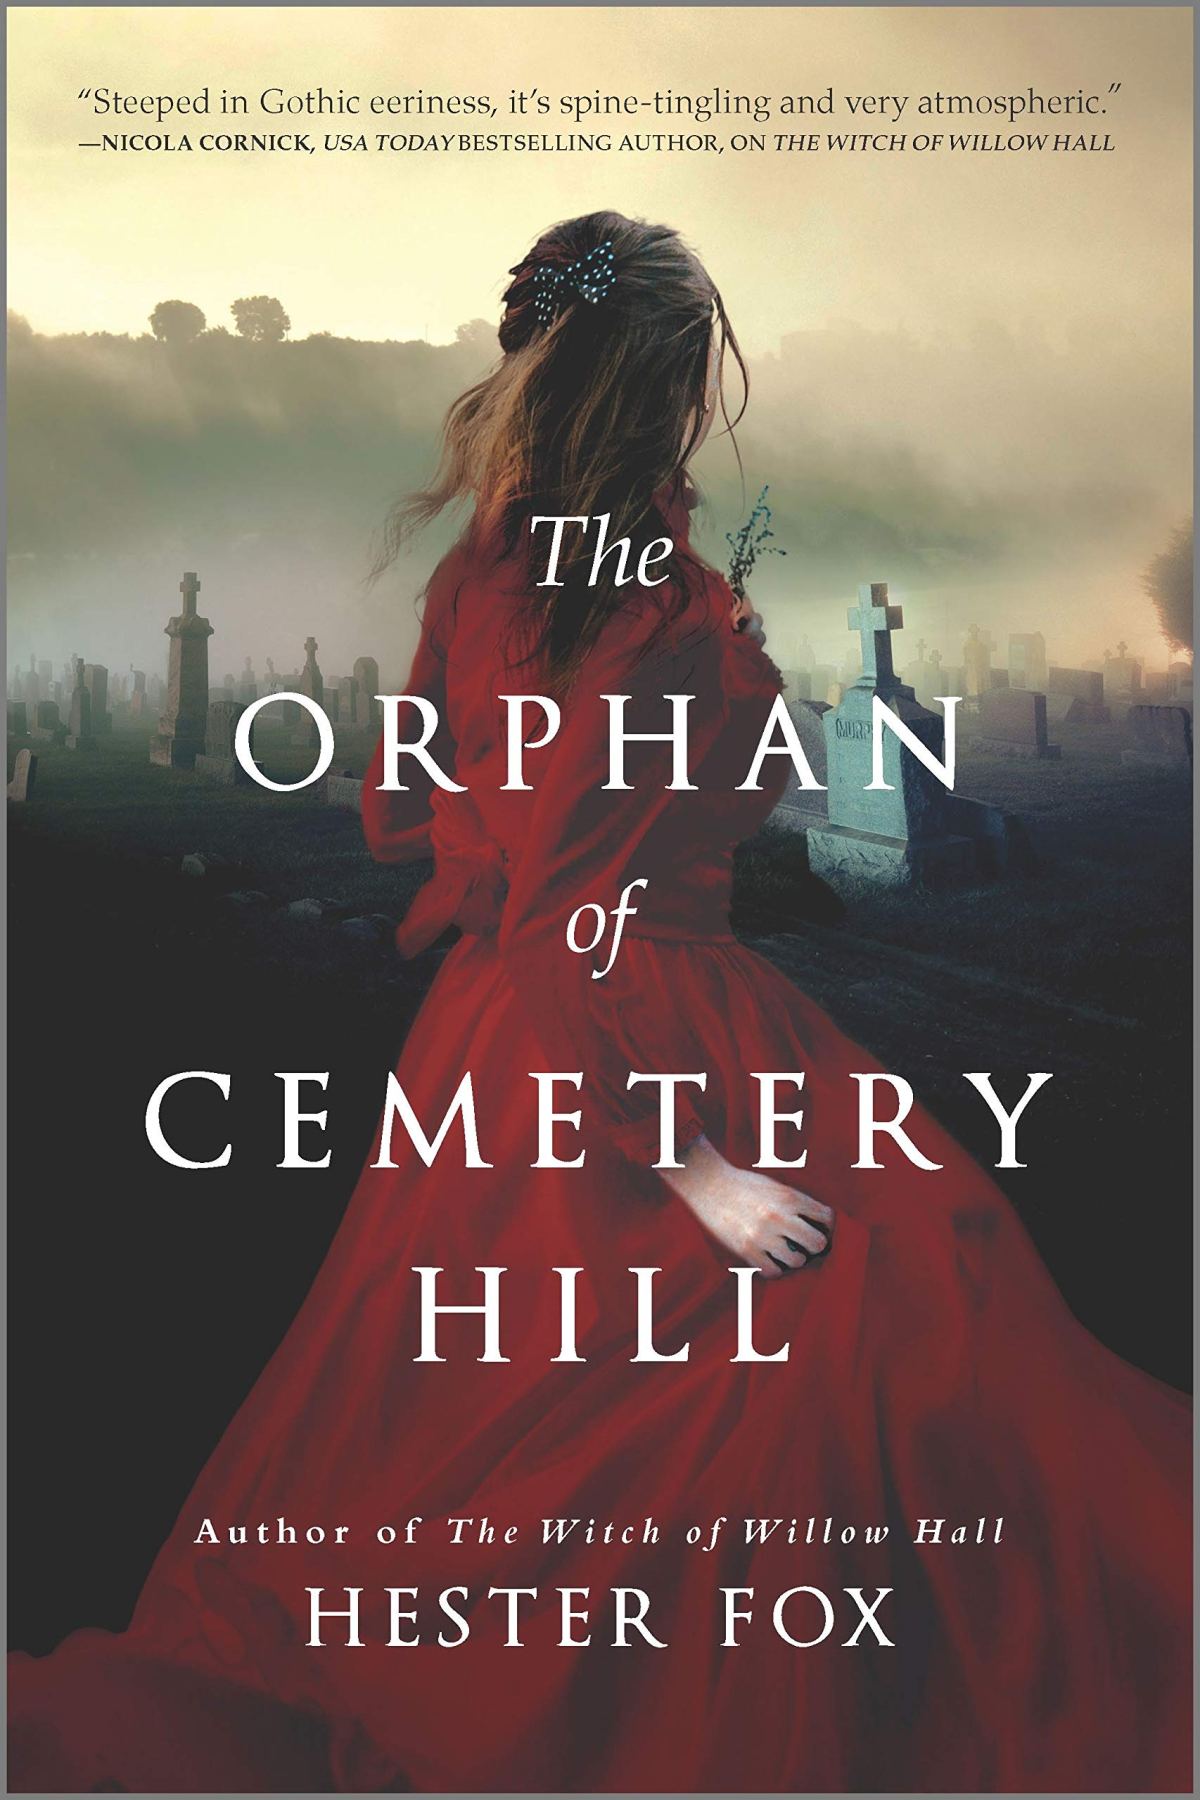 Book Review: The Orphan of Cemetery Hill by Hester Fox